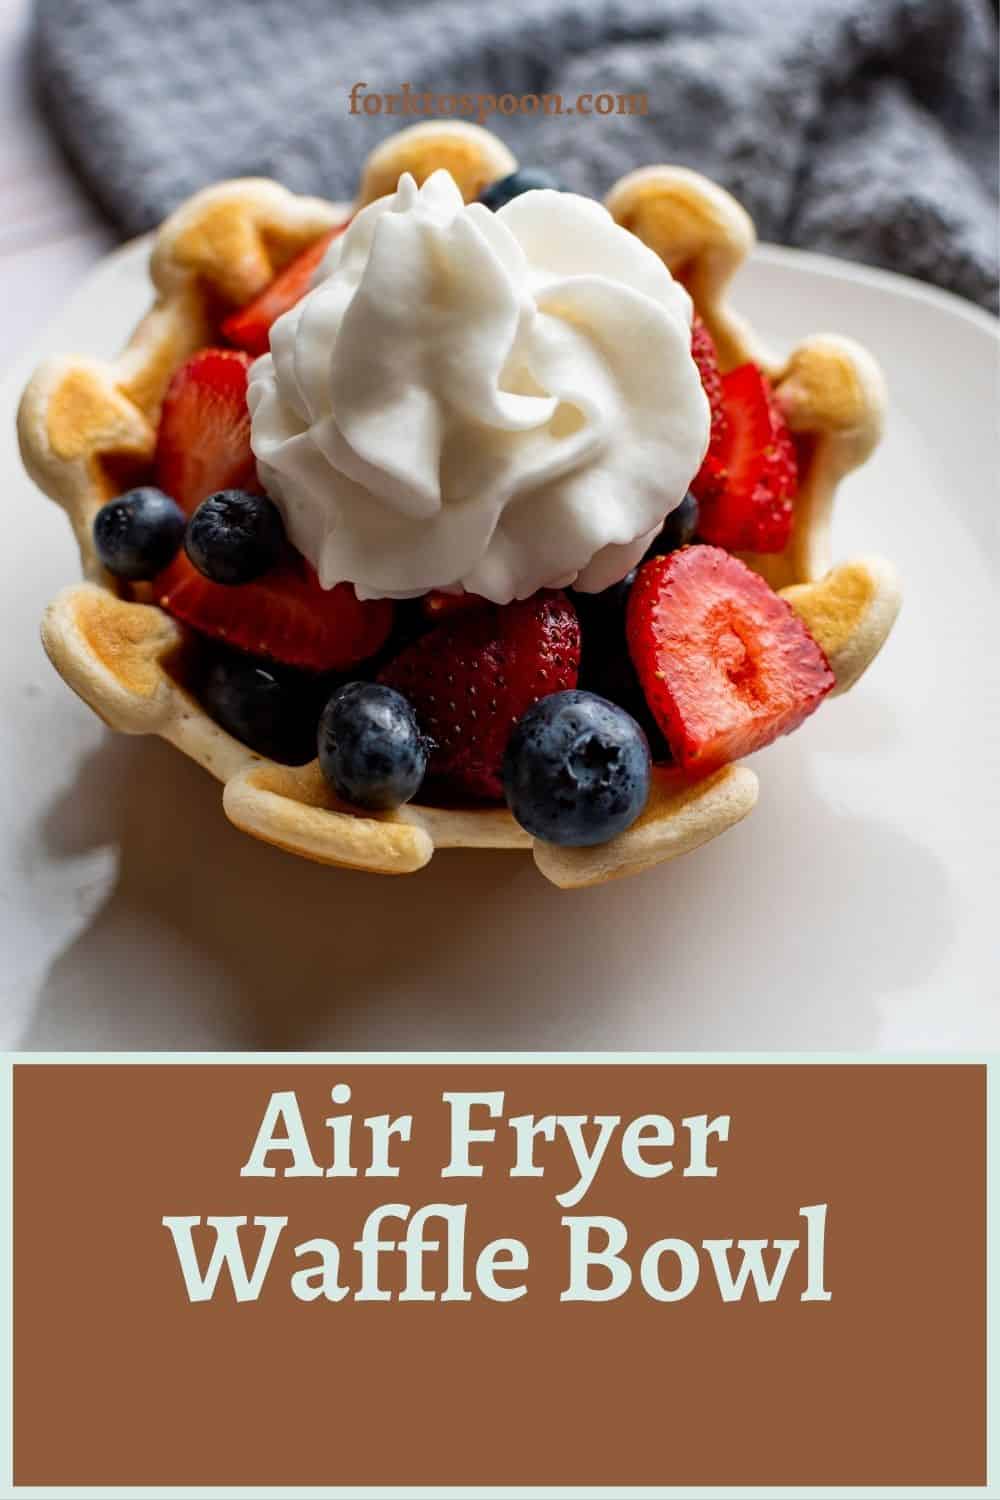 The On-Call Cook: Homemade Waffle Bowls